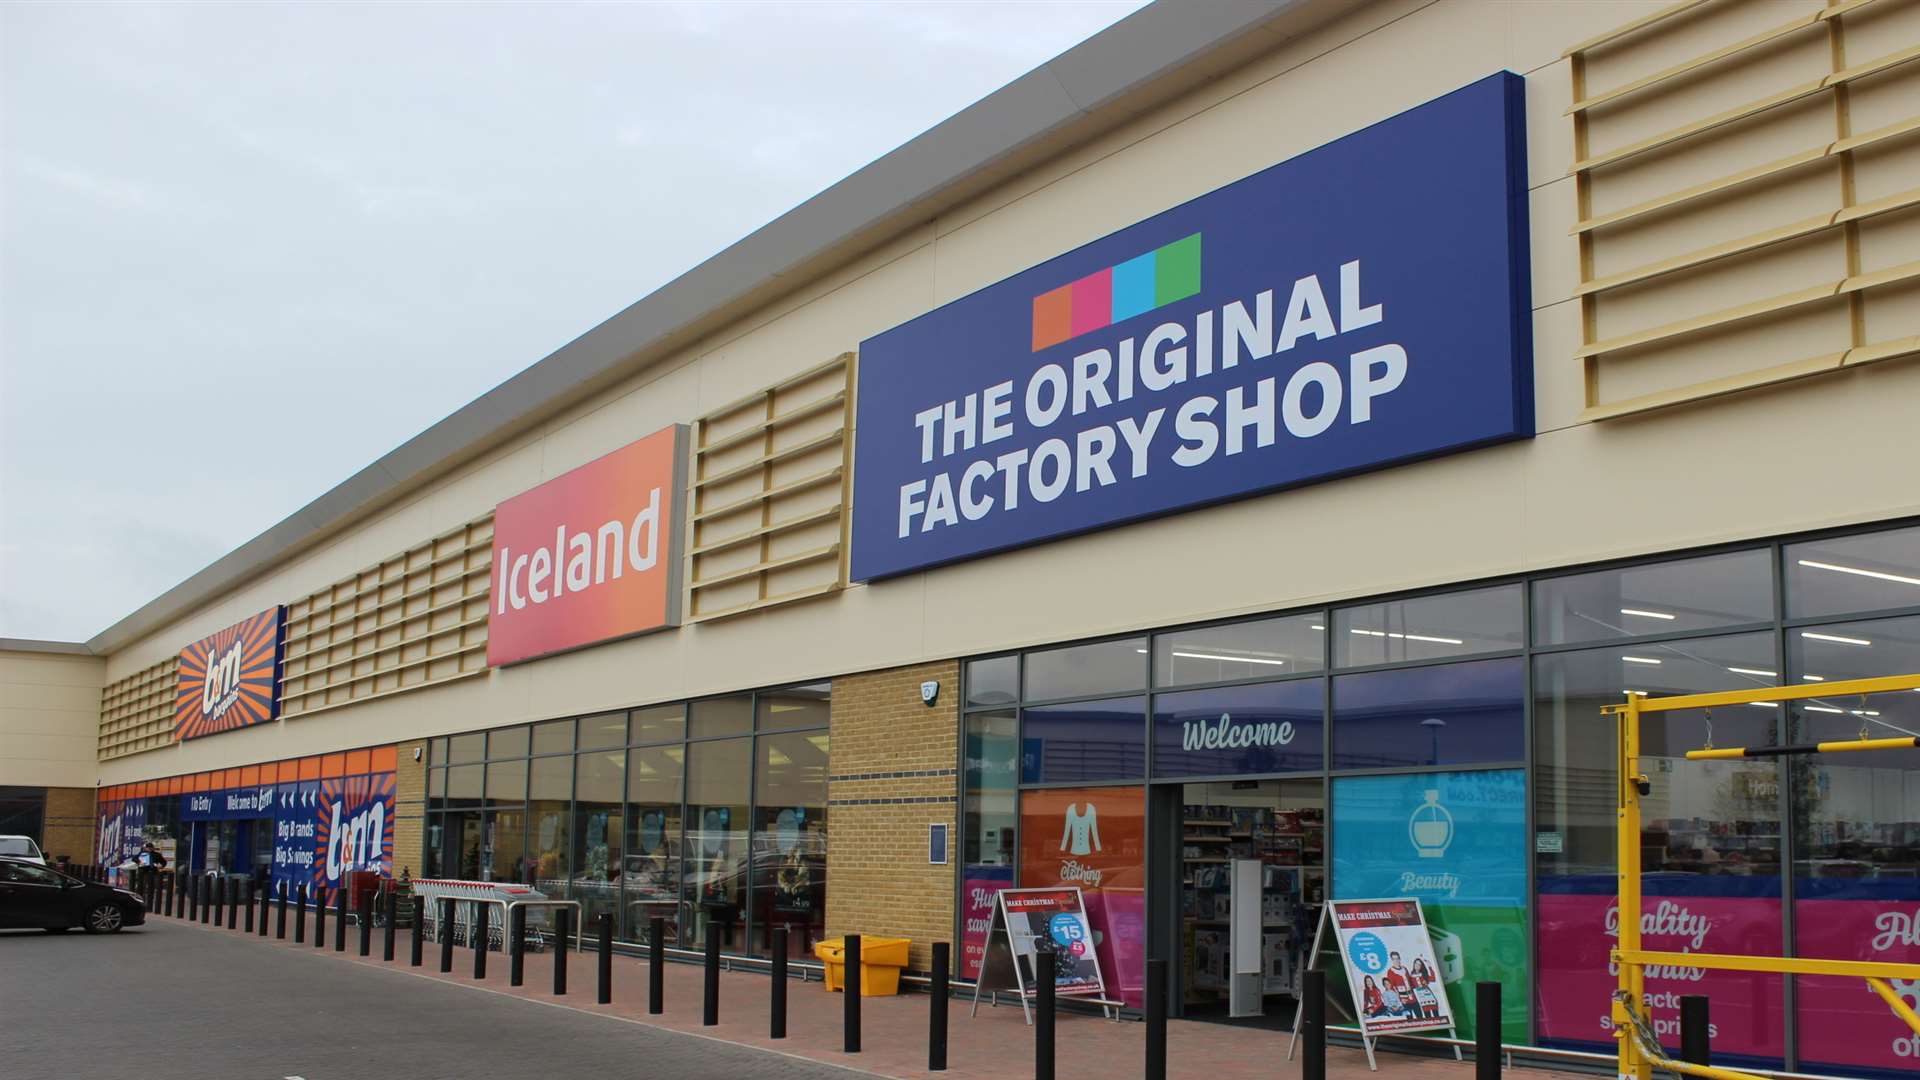 The Original Factory Shop which opened in December at Neat's Court, Queenborough.